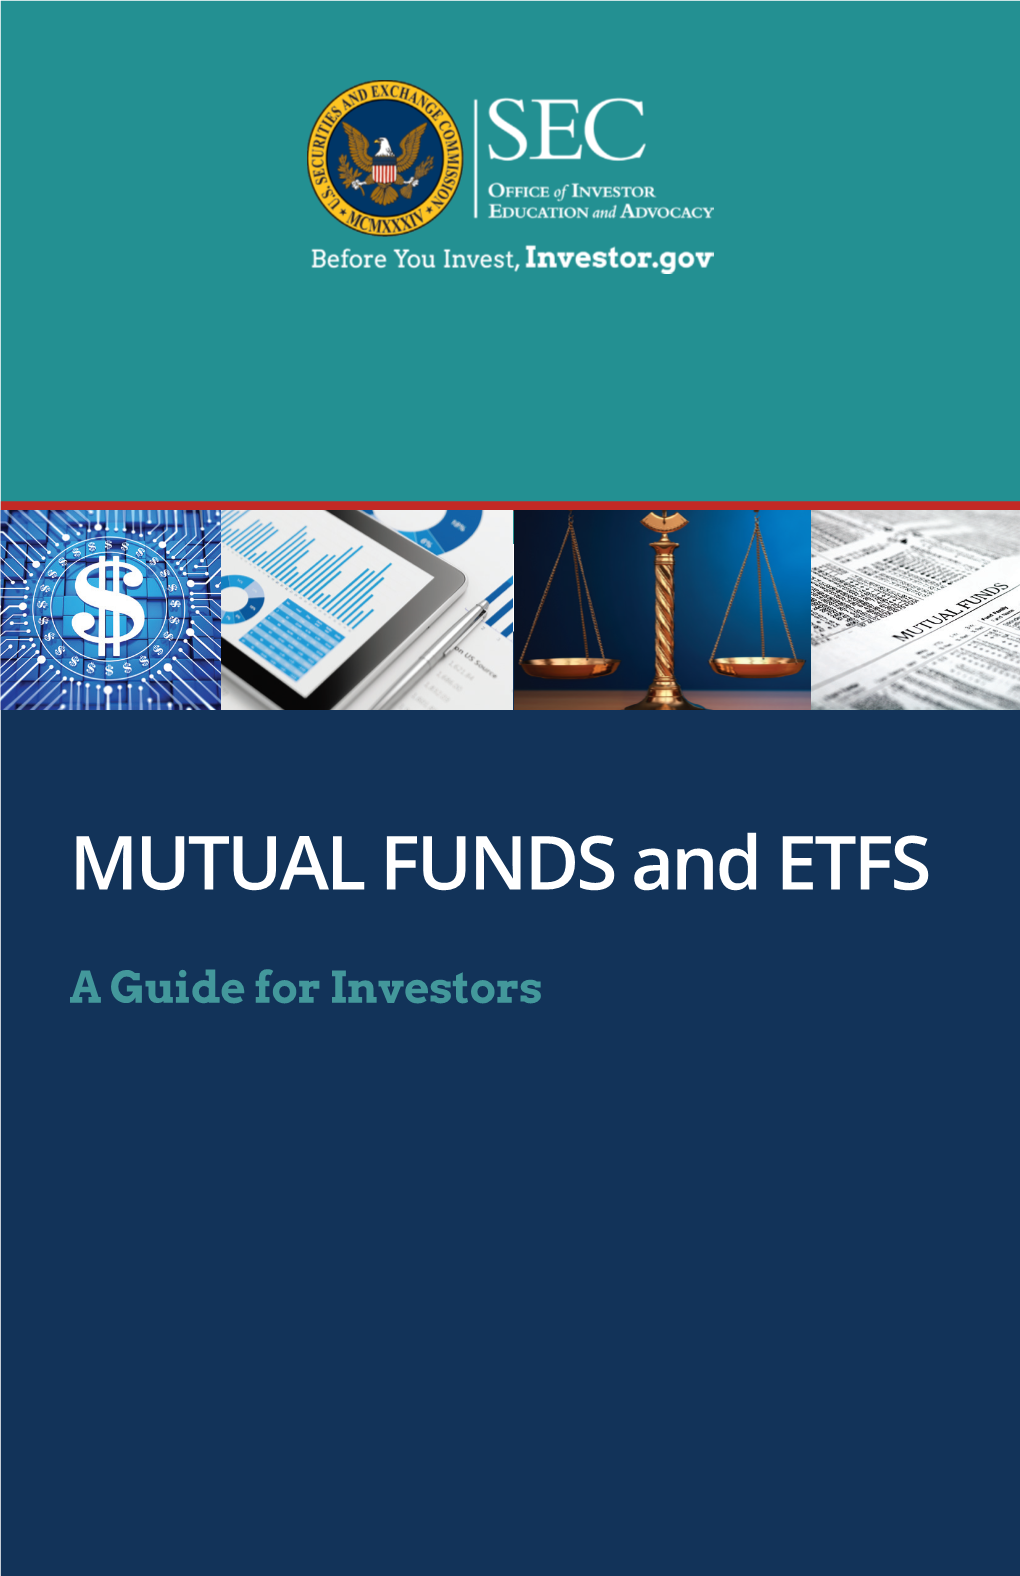 MUTUAL FUNDS and ETFS